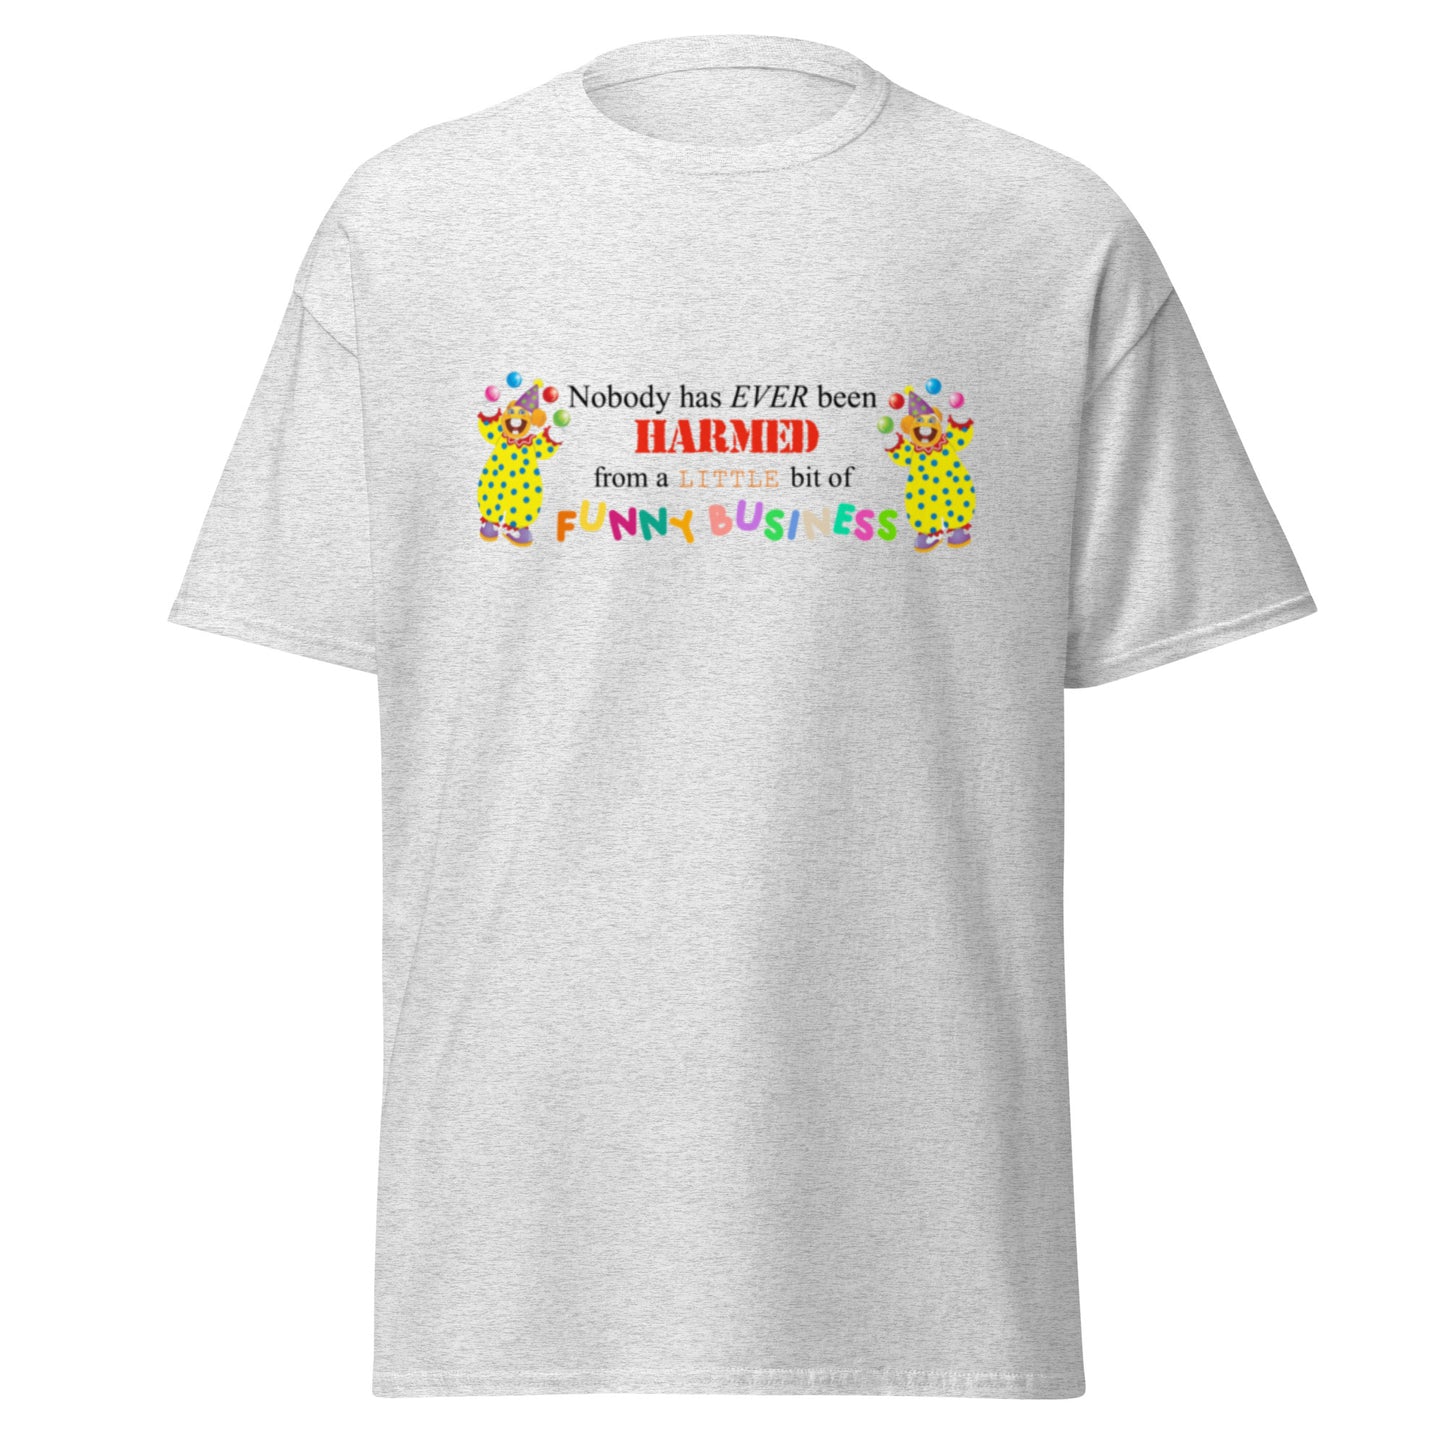 NOBODY HAS EVER BEEN HARMED FROM A LITTLE BIT OF FUNNY BUSINESS TEE